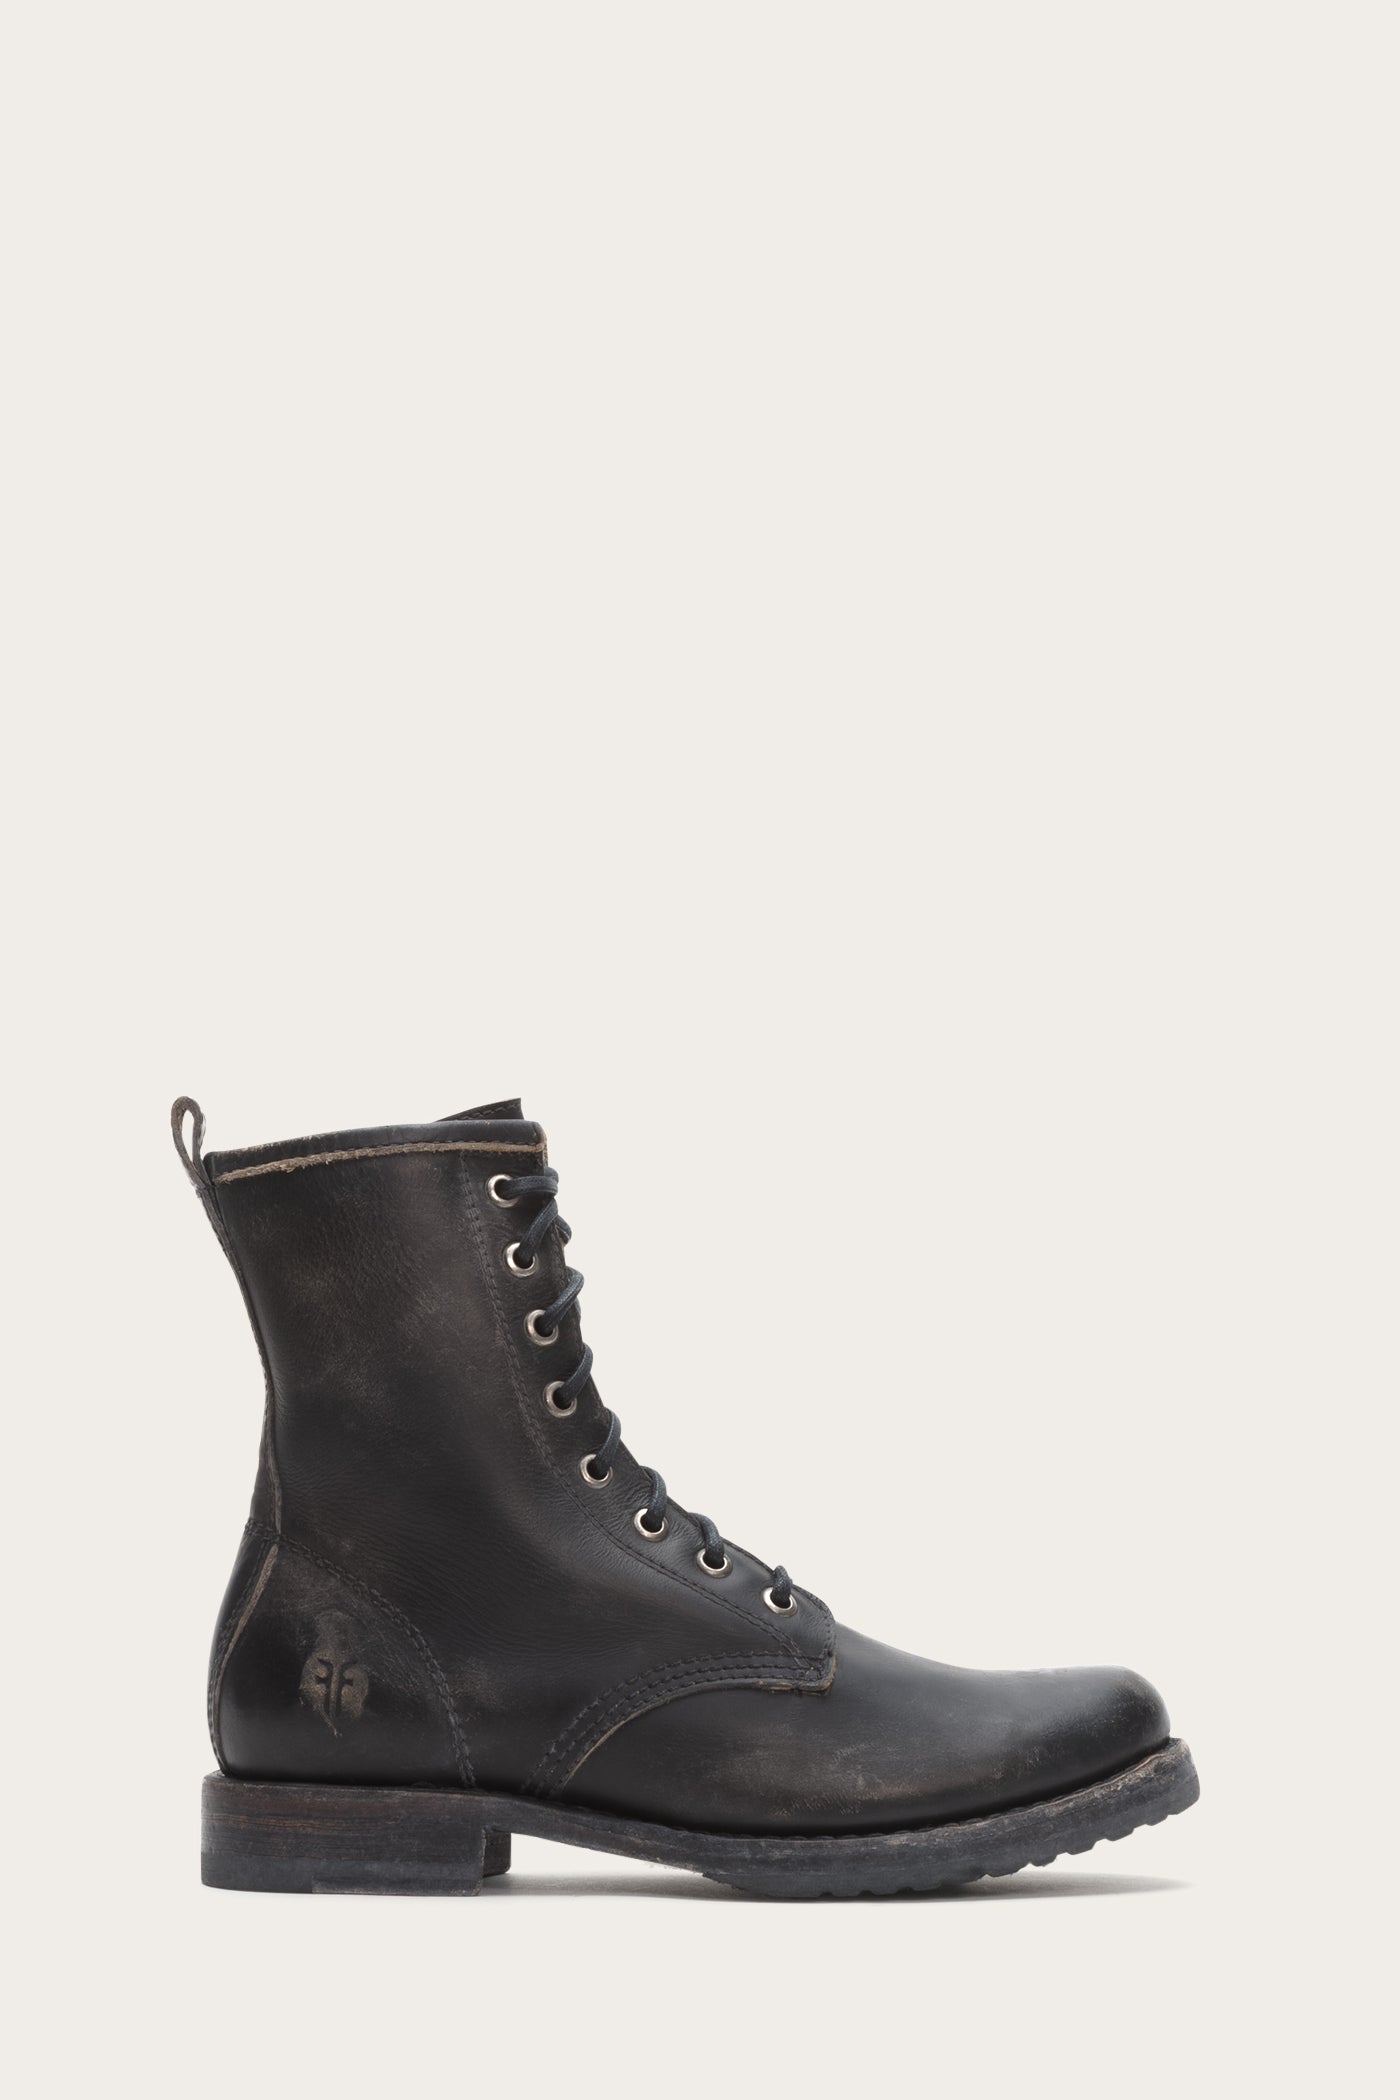 frye men's will lace up combat boot